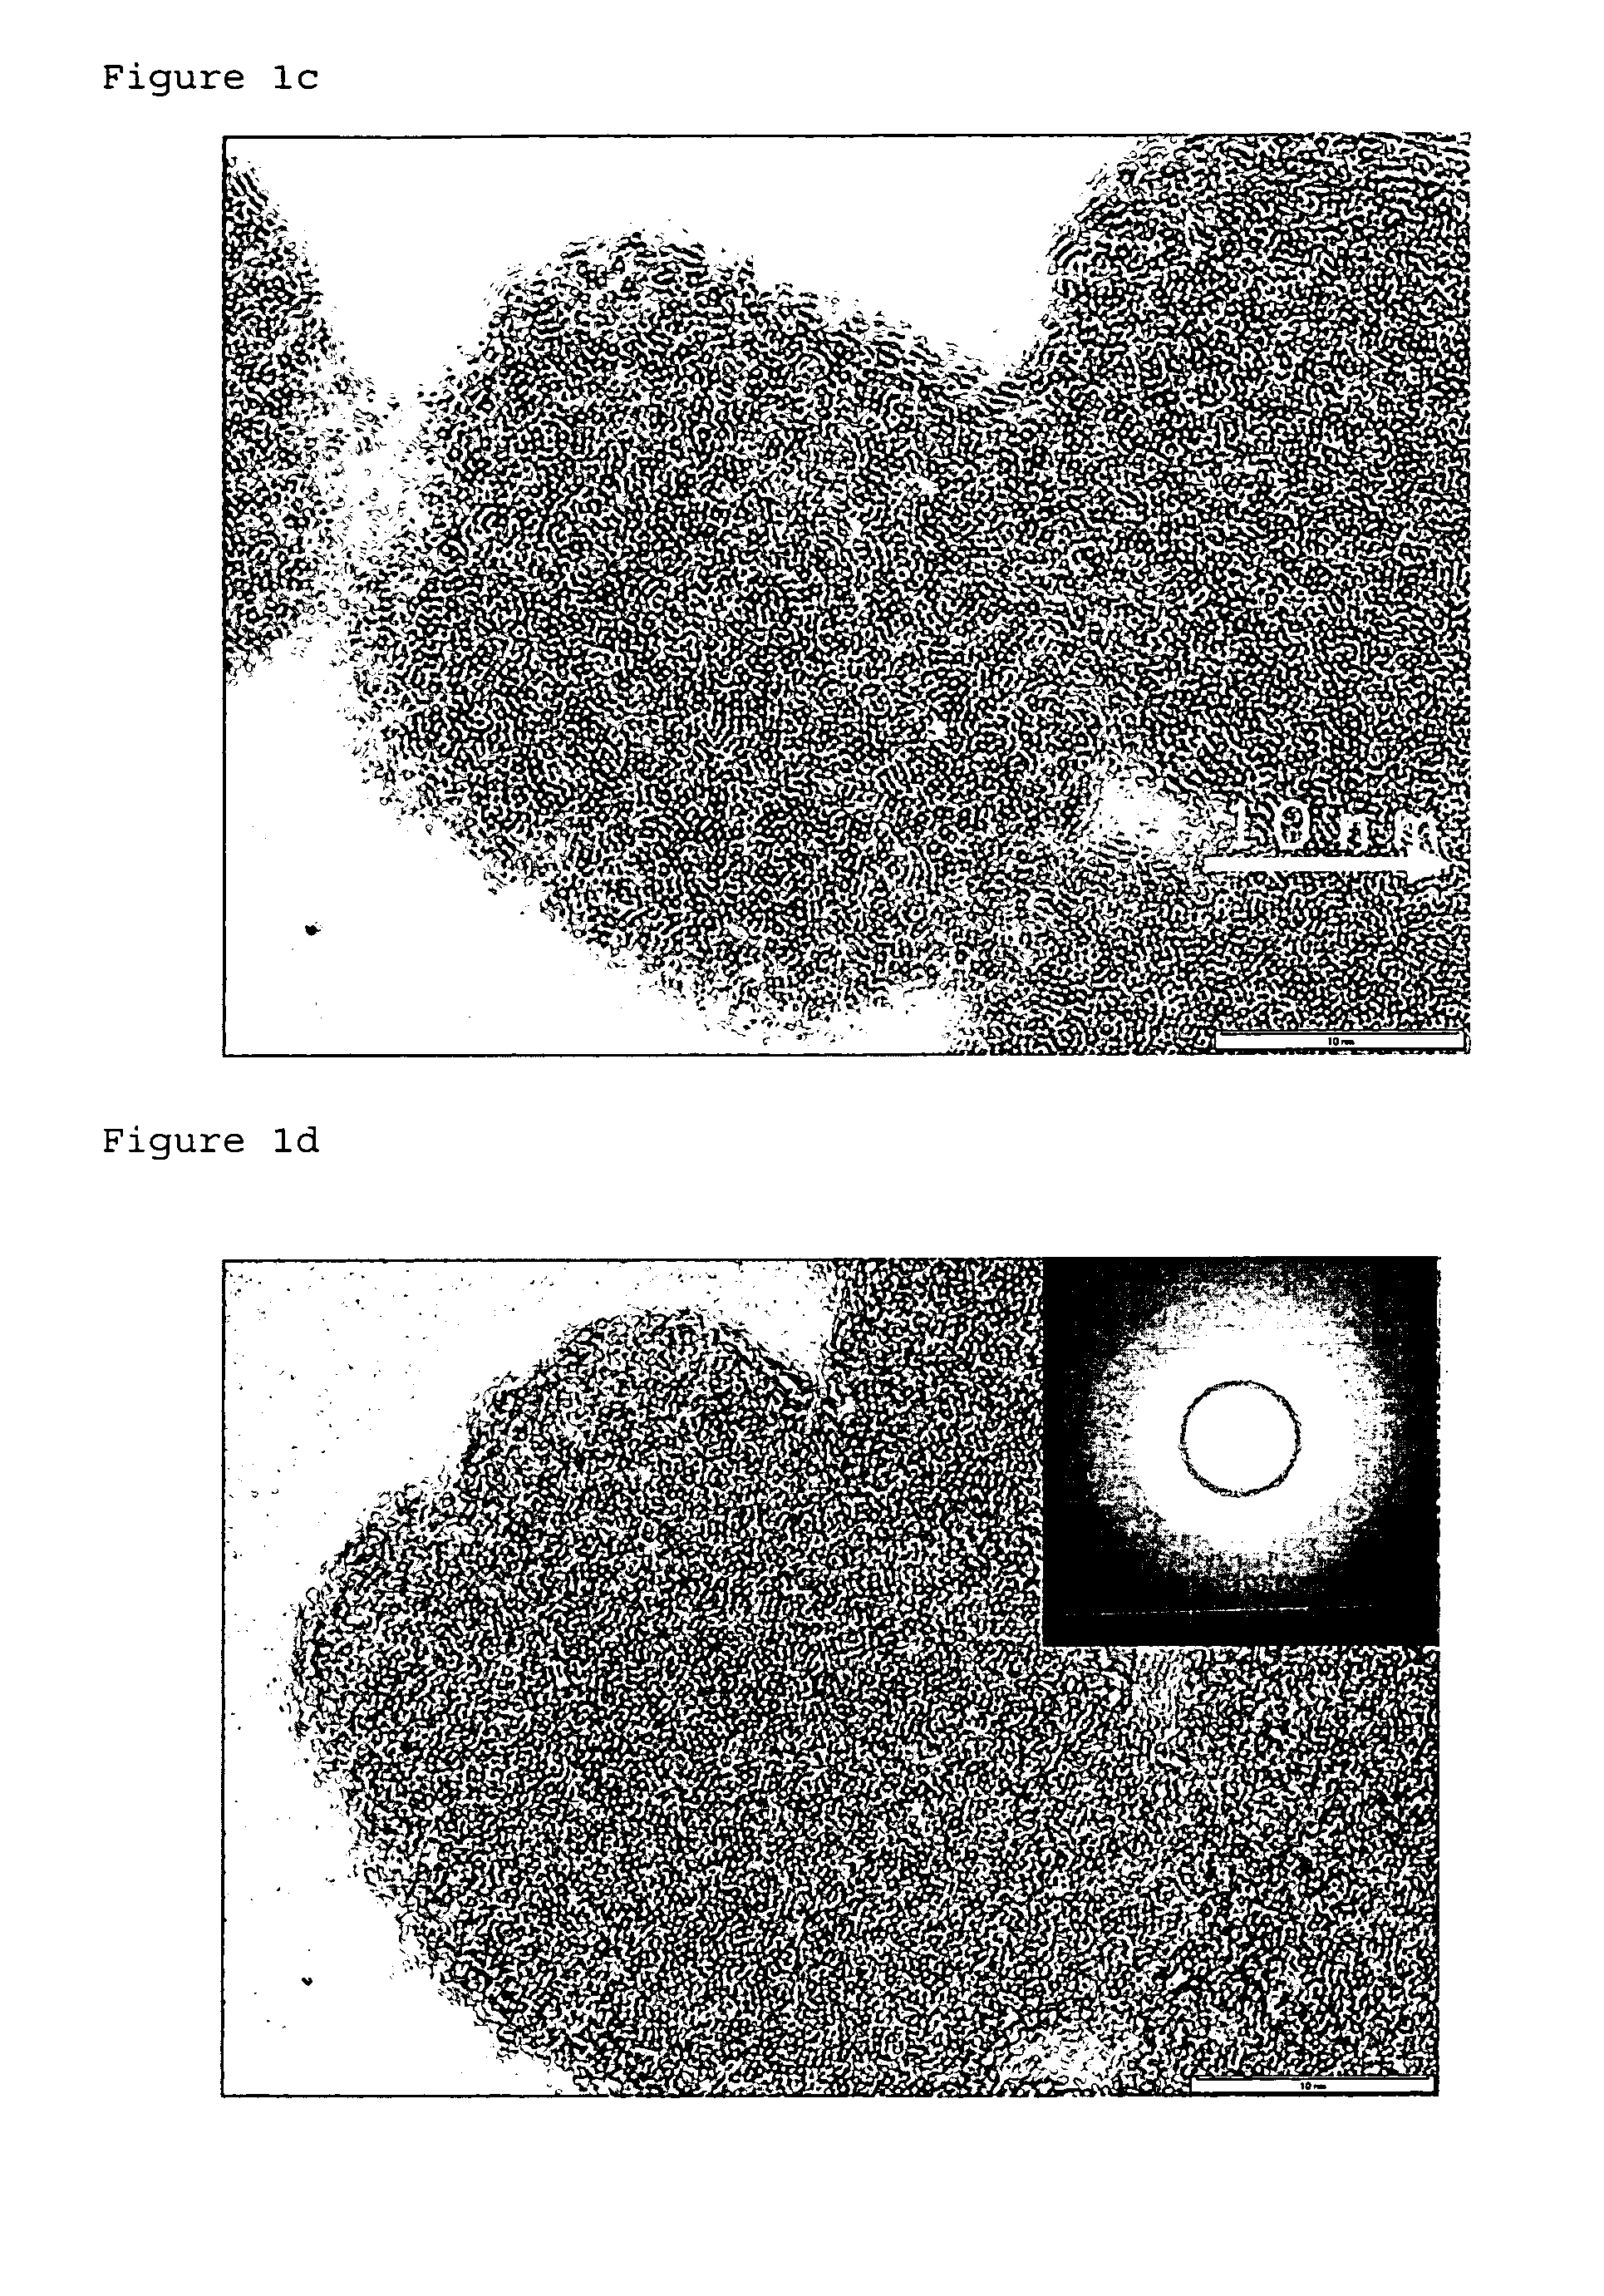 Nanocomposite material for the anode of a lithium cell